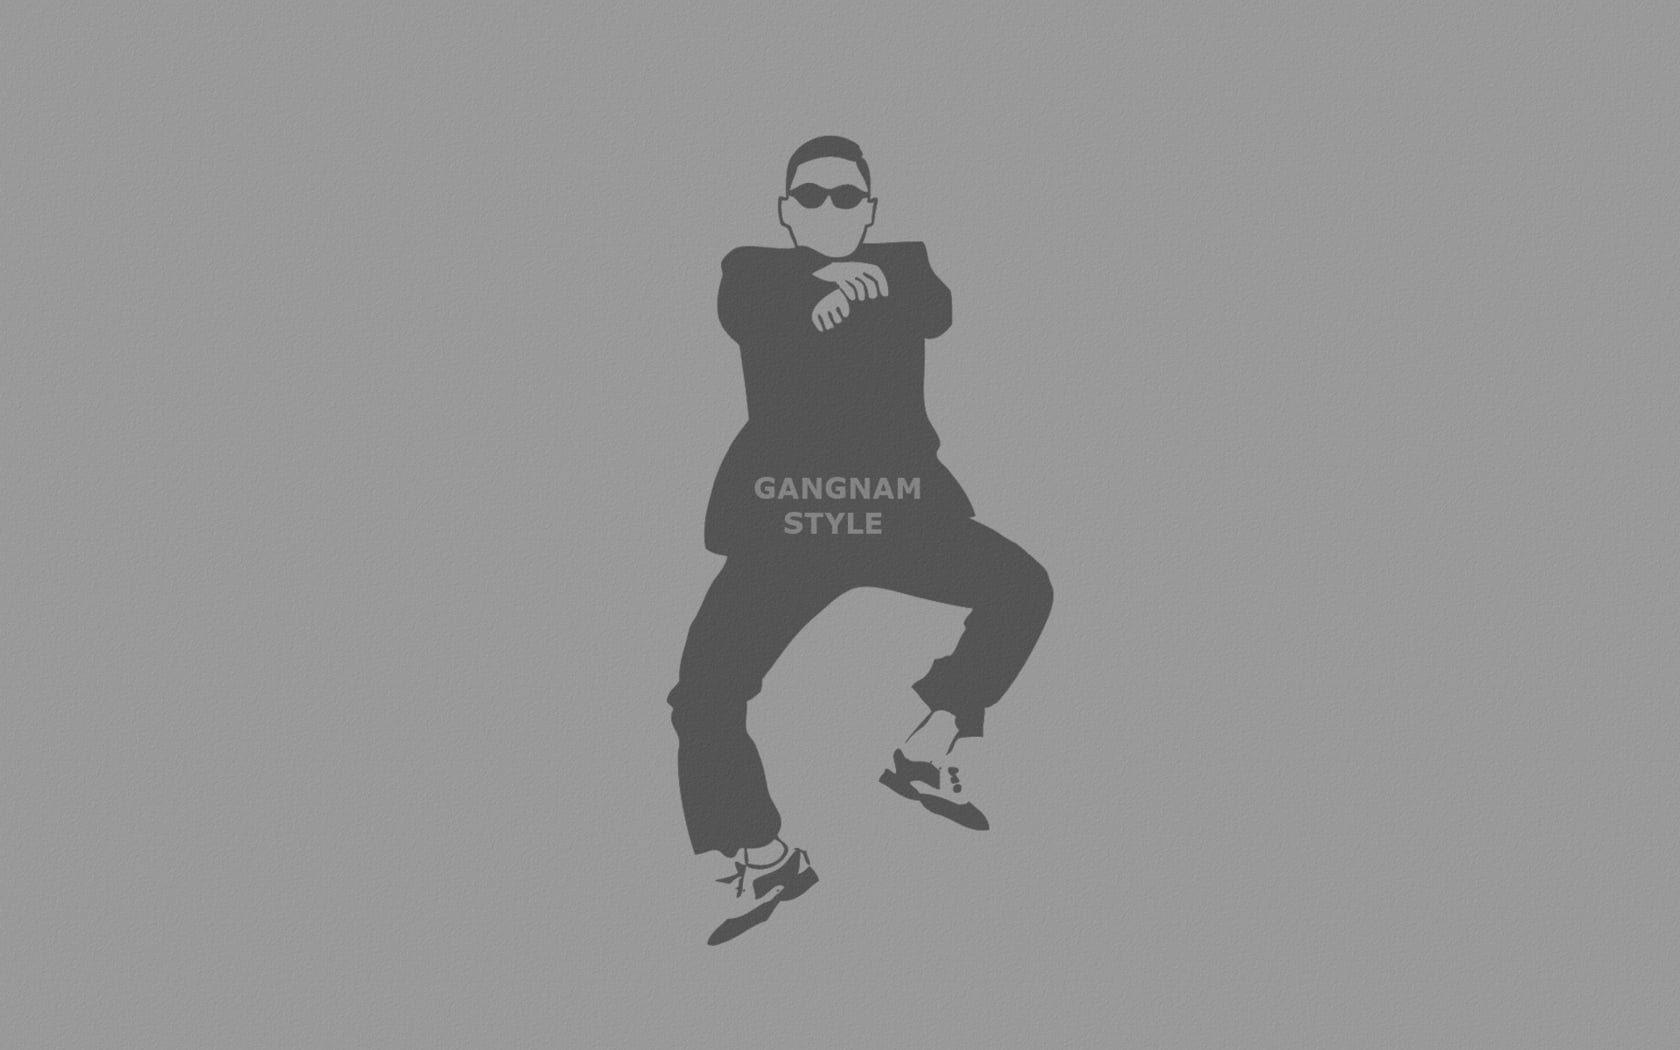 Gangnam Style wallpaper, sign, gray background, people, dancing